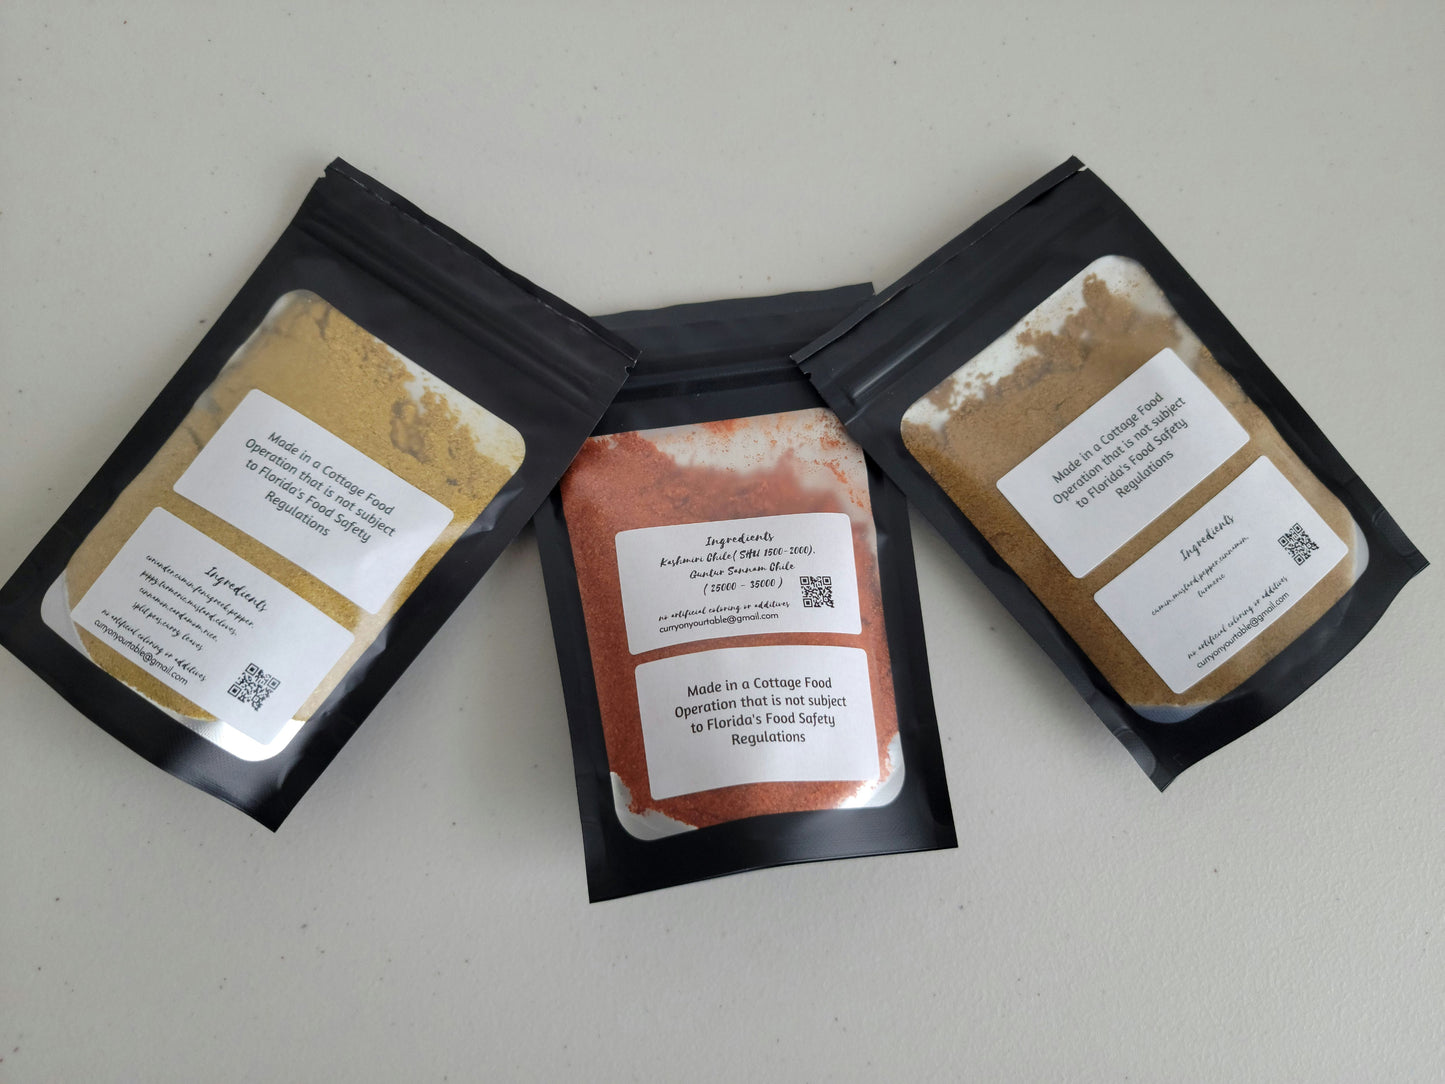 The Mohan Spice Blends. Set of all Three Blends.